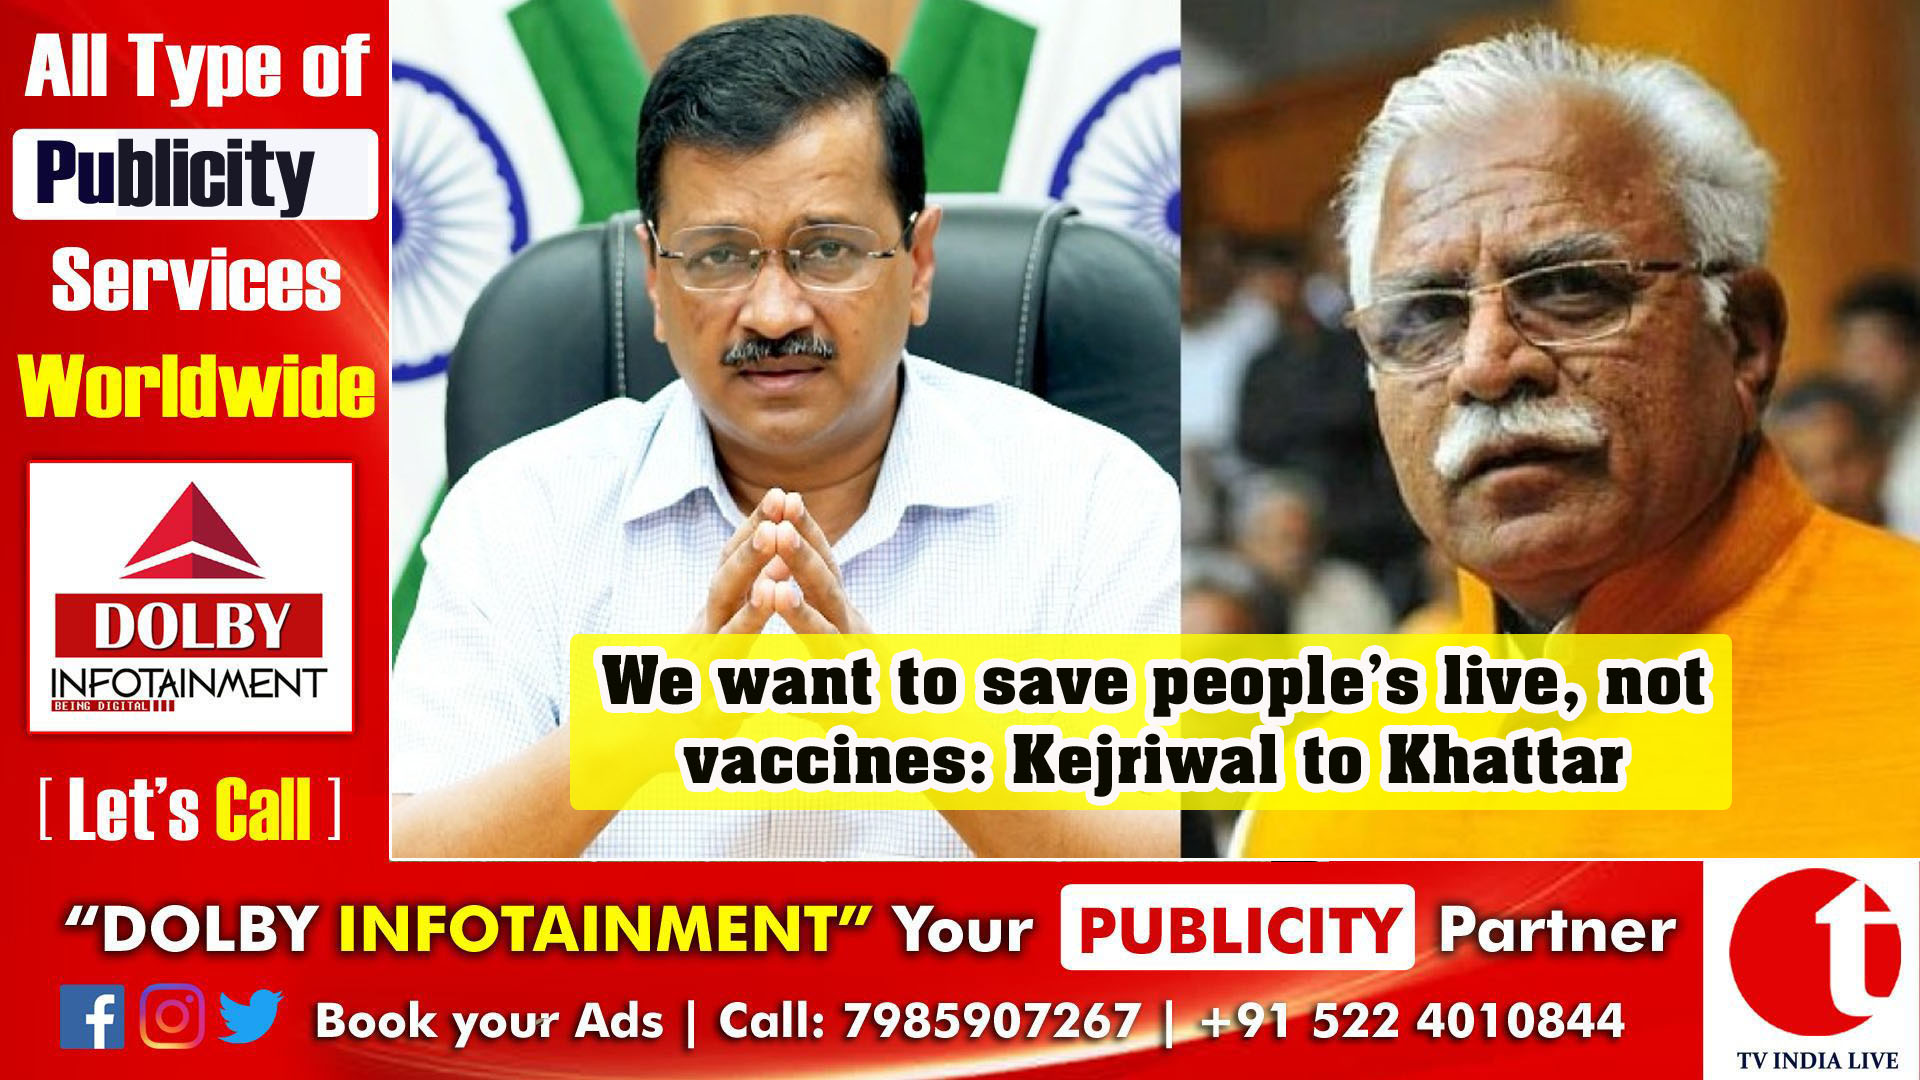 We want to save people’s live, not vaccines: Kejriwal to Khattar